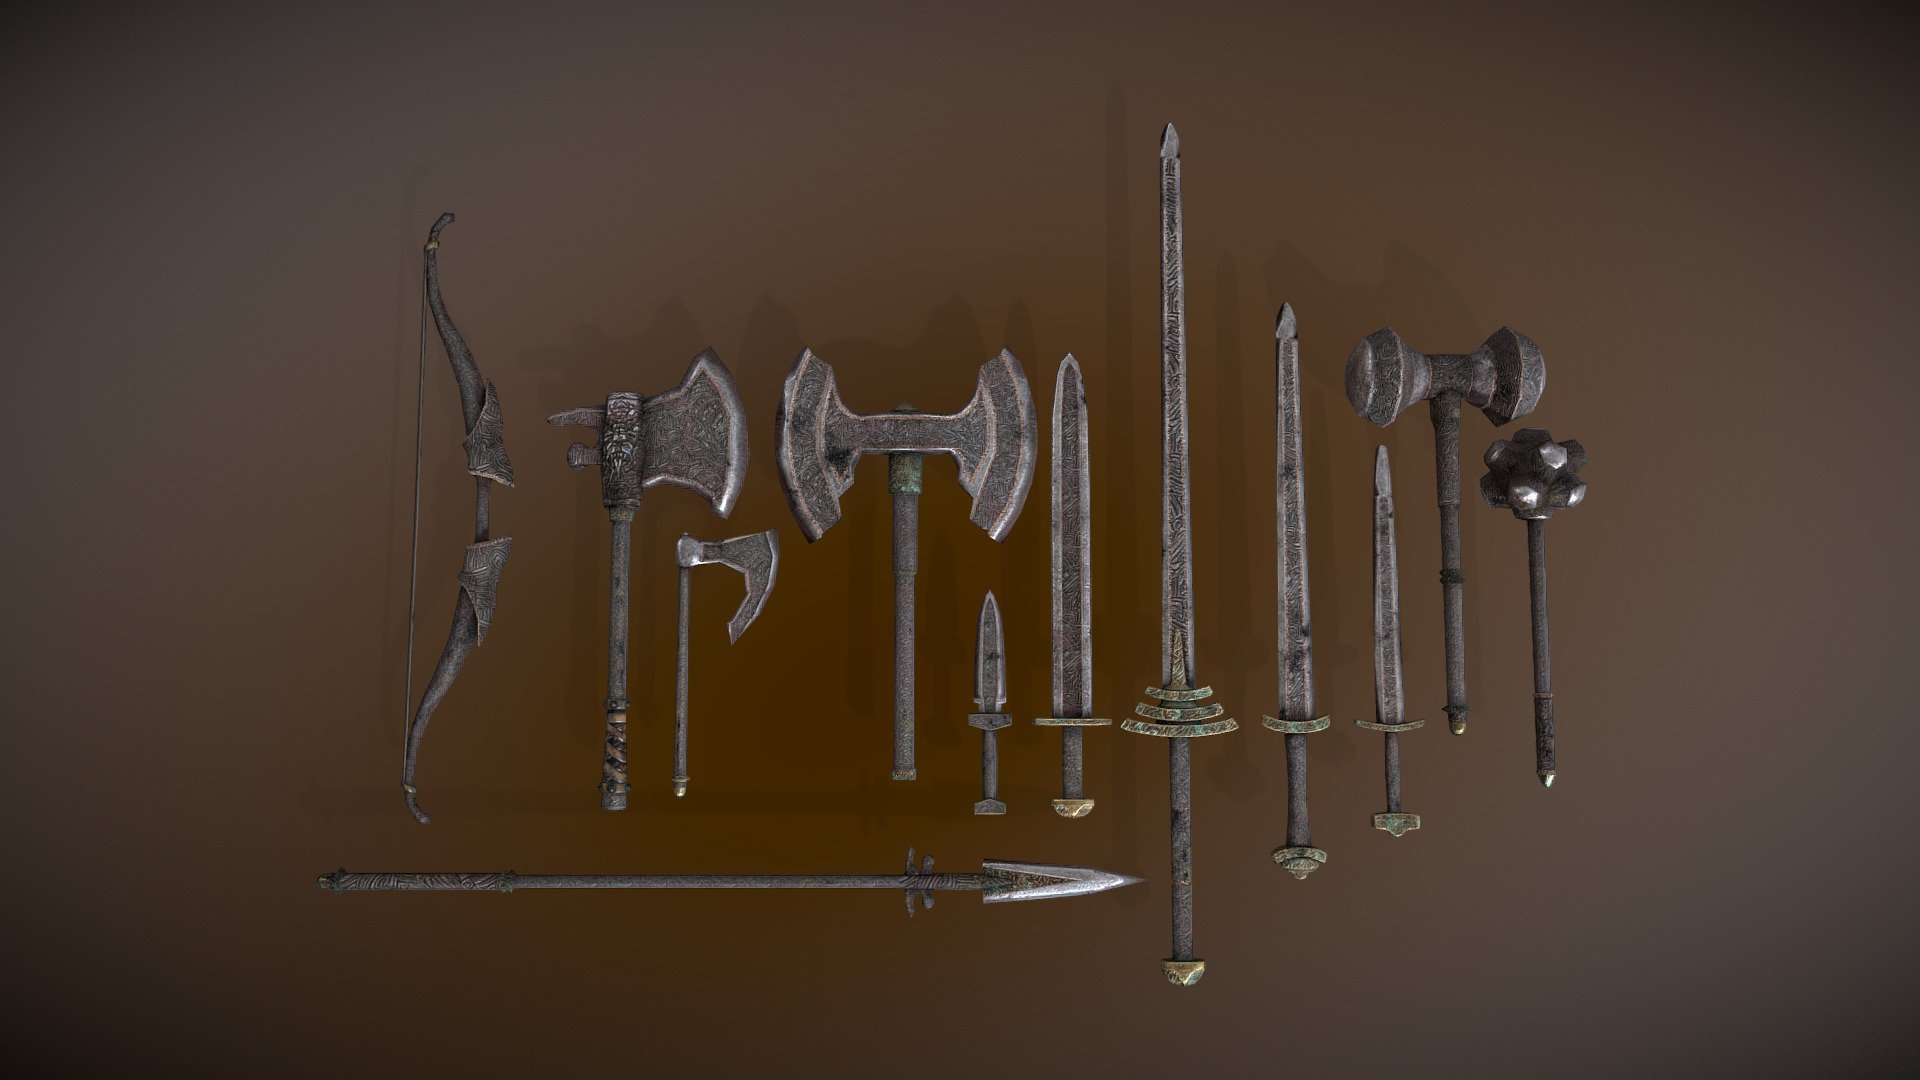 Revamp of the Nordic Weapon Set from morrowind. 
The base game only had three weapons in this set, I've added some over the years,
and wanted to flesh it more out with updated textures, and also tweaked the vanilla models.

There still is room for improvement so in a few years I'll probably come back around on these,
but for now. Here they are. 3d model